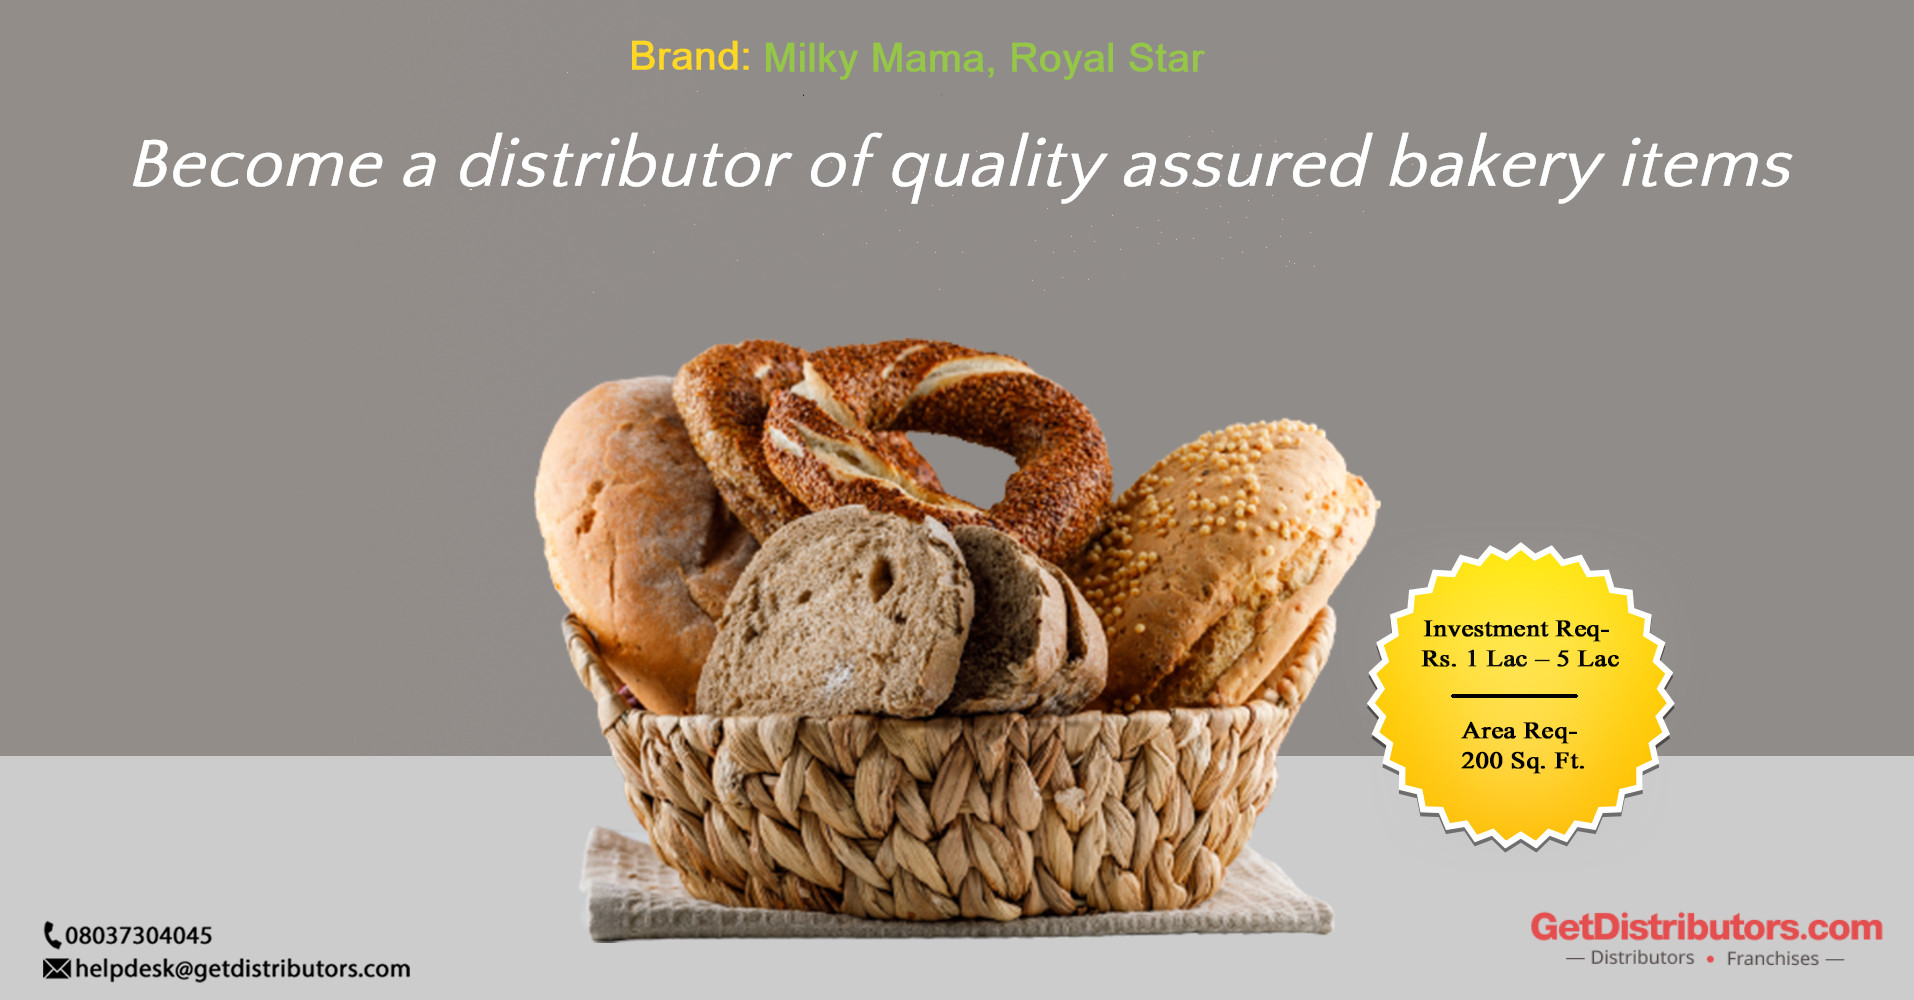 Become a distributor of quality assured bakery items